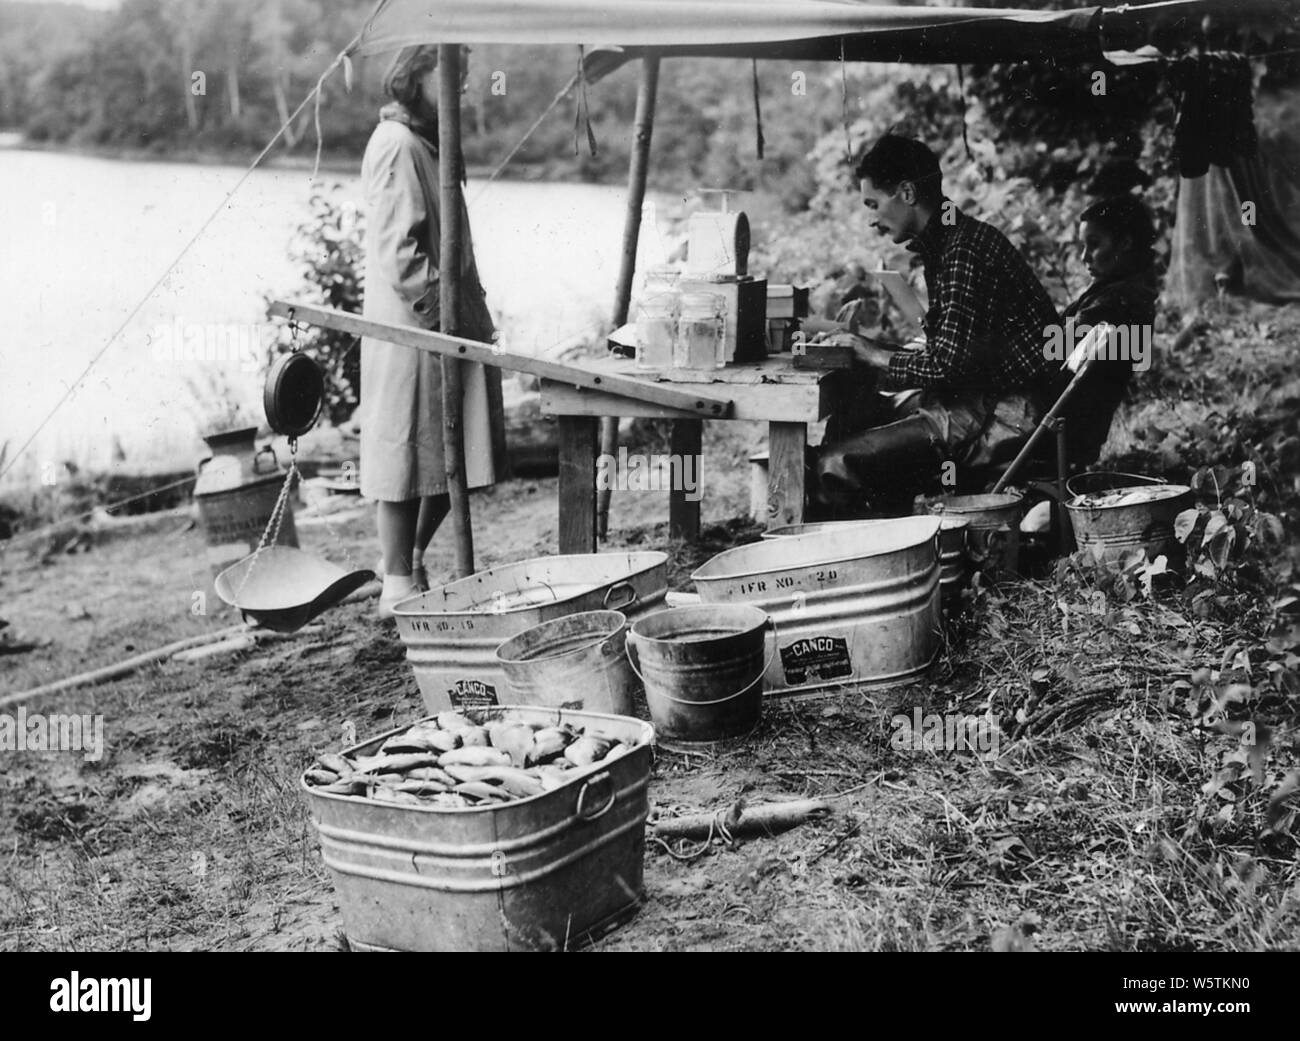 Photograph of Fish Removal Work at Twin Lake; Scope and content:  Original caption: Fish removal work at Twin Lake. Dr. and Mrs. Krumholtz Measuring and sexing large-mouth bass removed from Twin Lake by derris root poisoning. Tub of fish in foreground contains bluegills, large-mouth bass and sunfish. Stock Photo